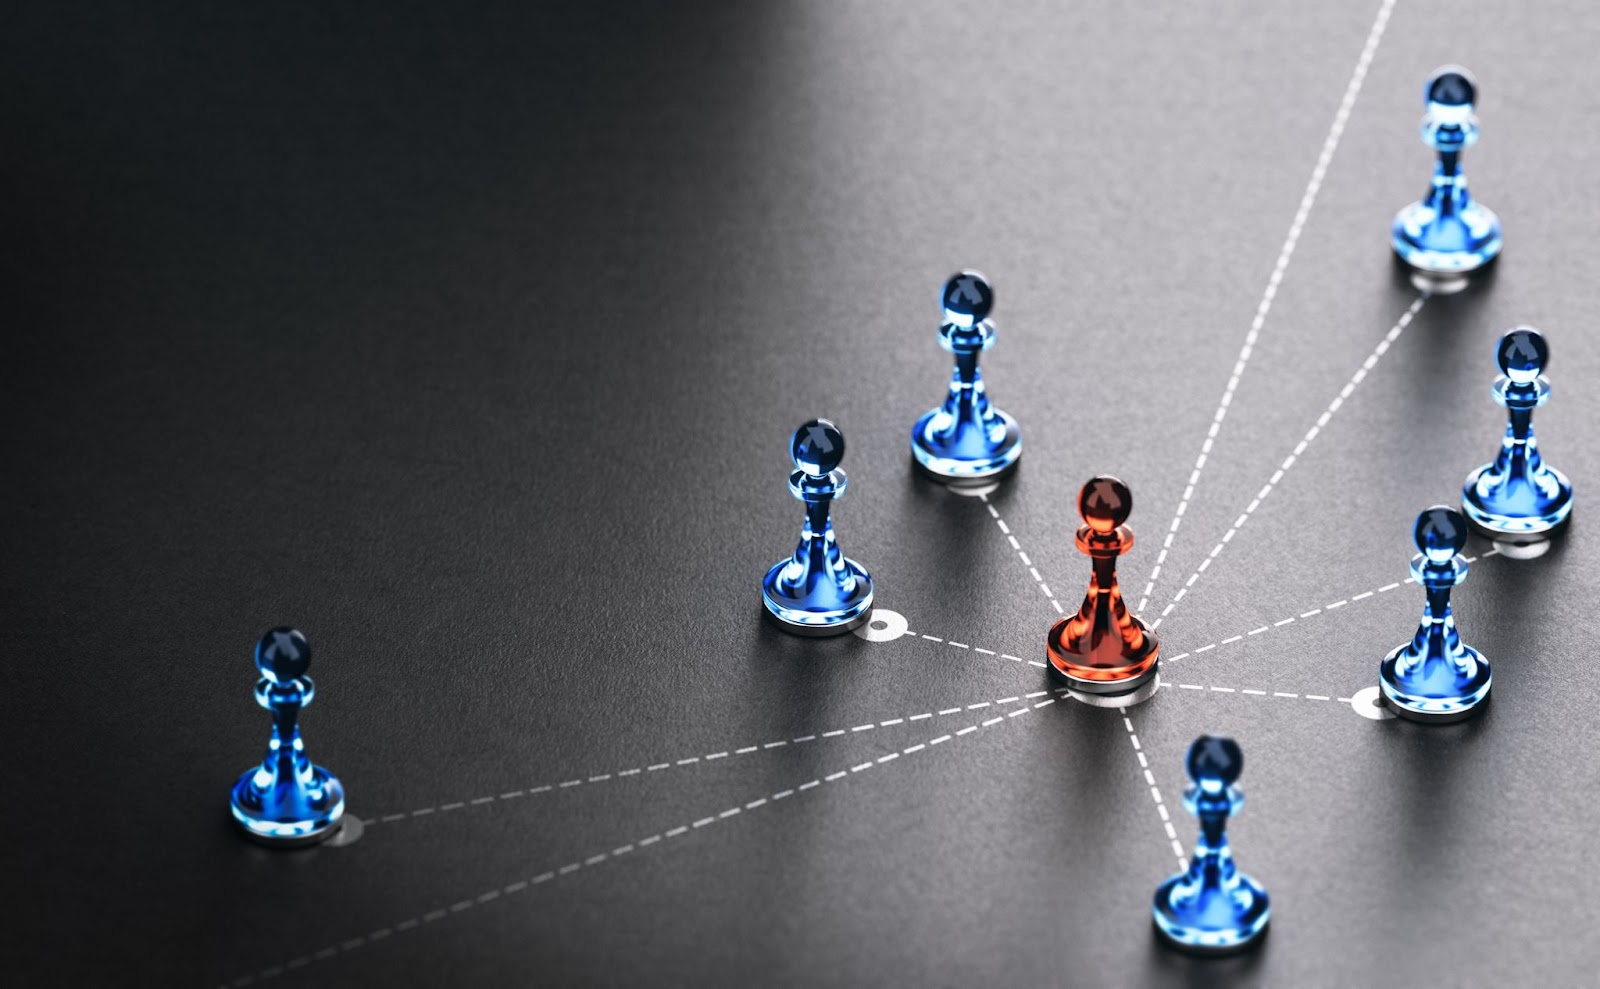 chess pieces illustrating supply chain communication